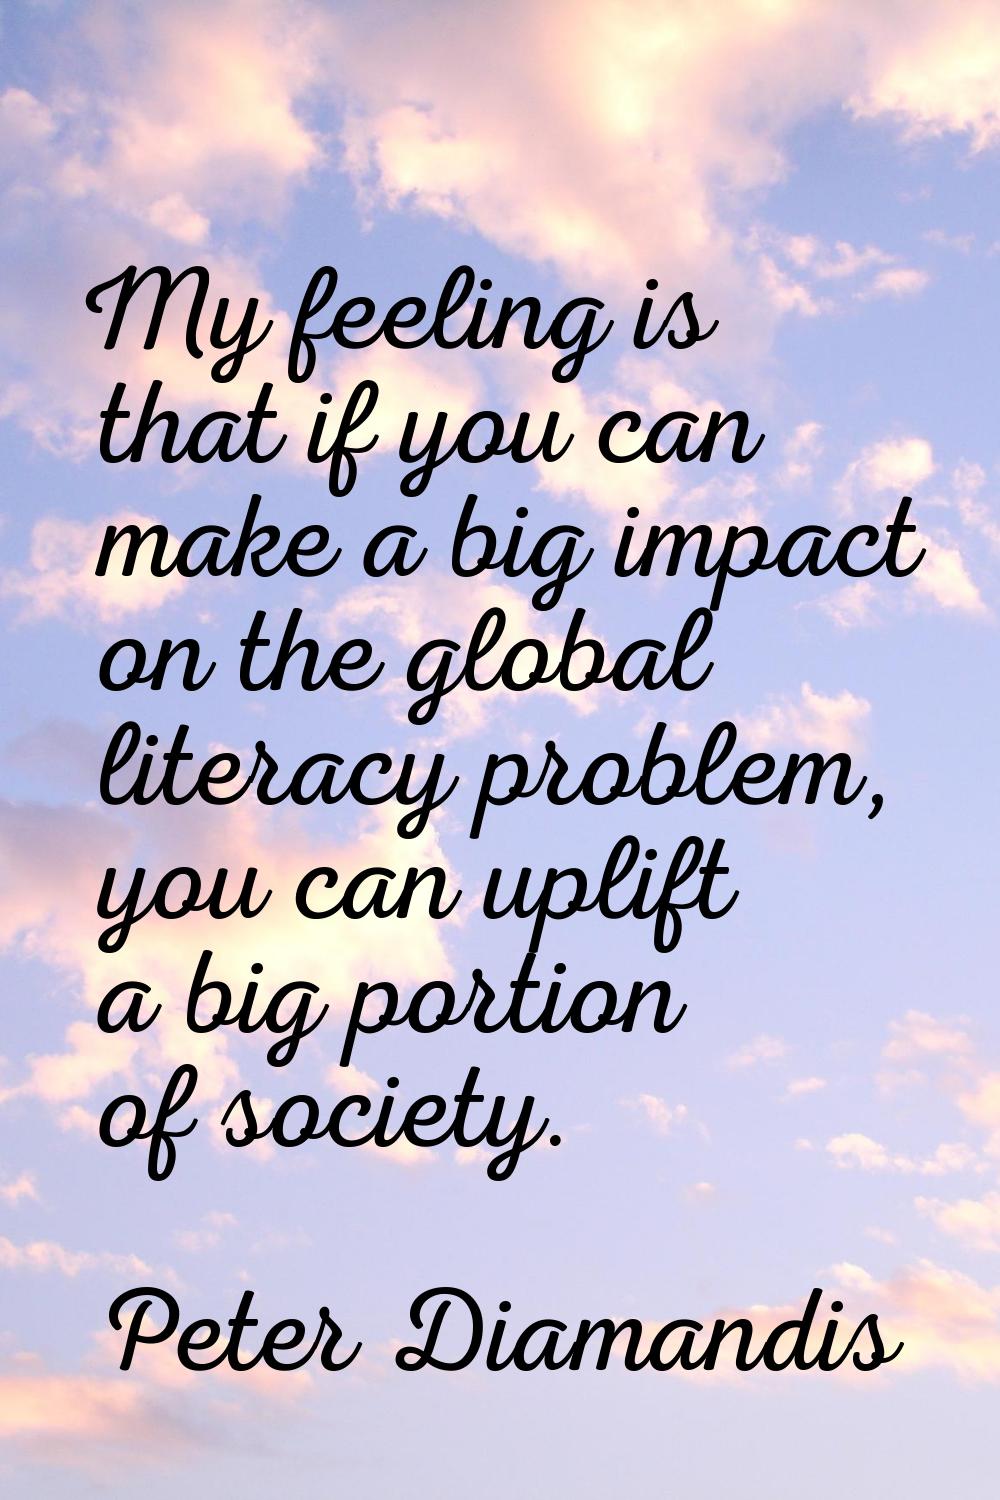 My feeling is that if you can make a big impact on the global literacy problem, you can uplift a bi